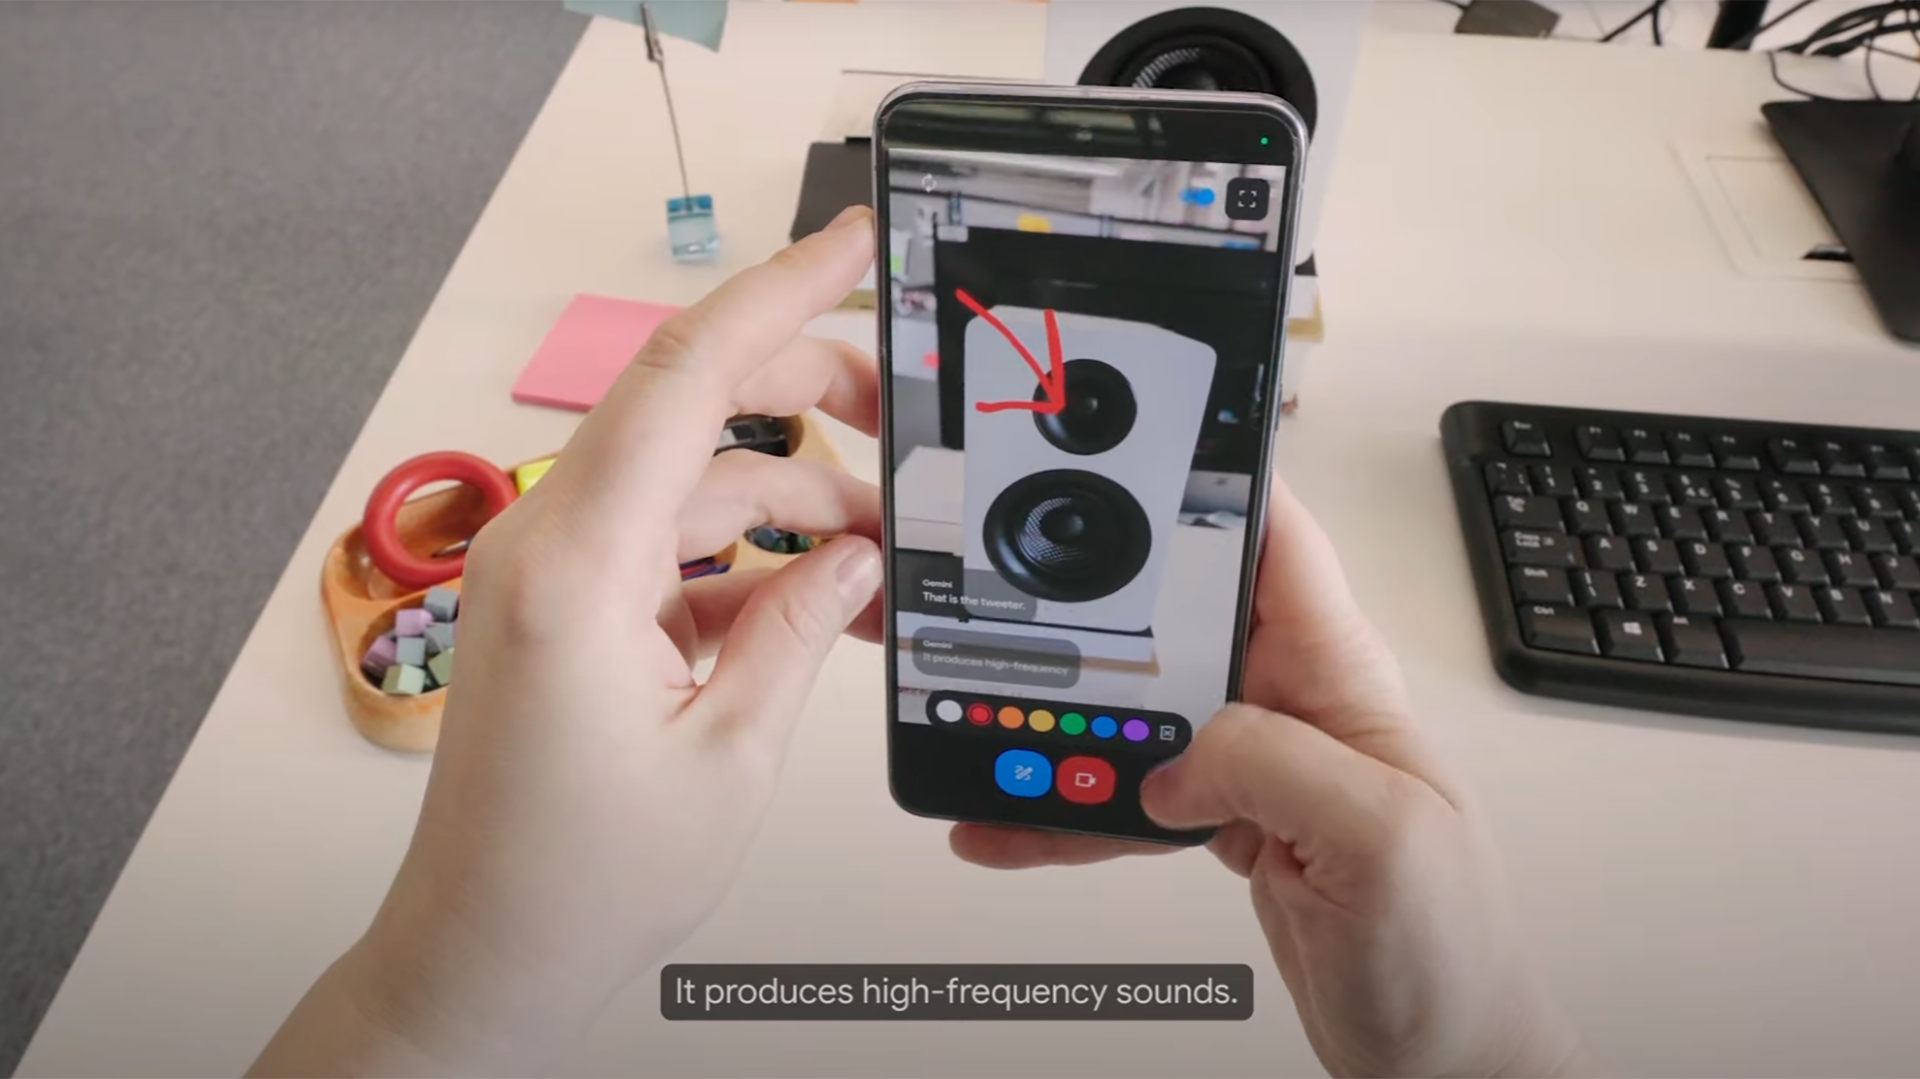 screenshot from Astra demo where user draws a red arrow on the phone screen where the phone&#039;s camera is showing the top of a speaker on a desk in the room, and Astra responds by saying the tweeter &quot;produces high-frequency sounds.&quot;